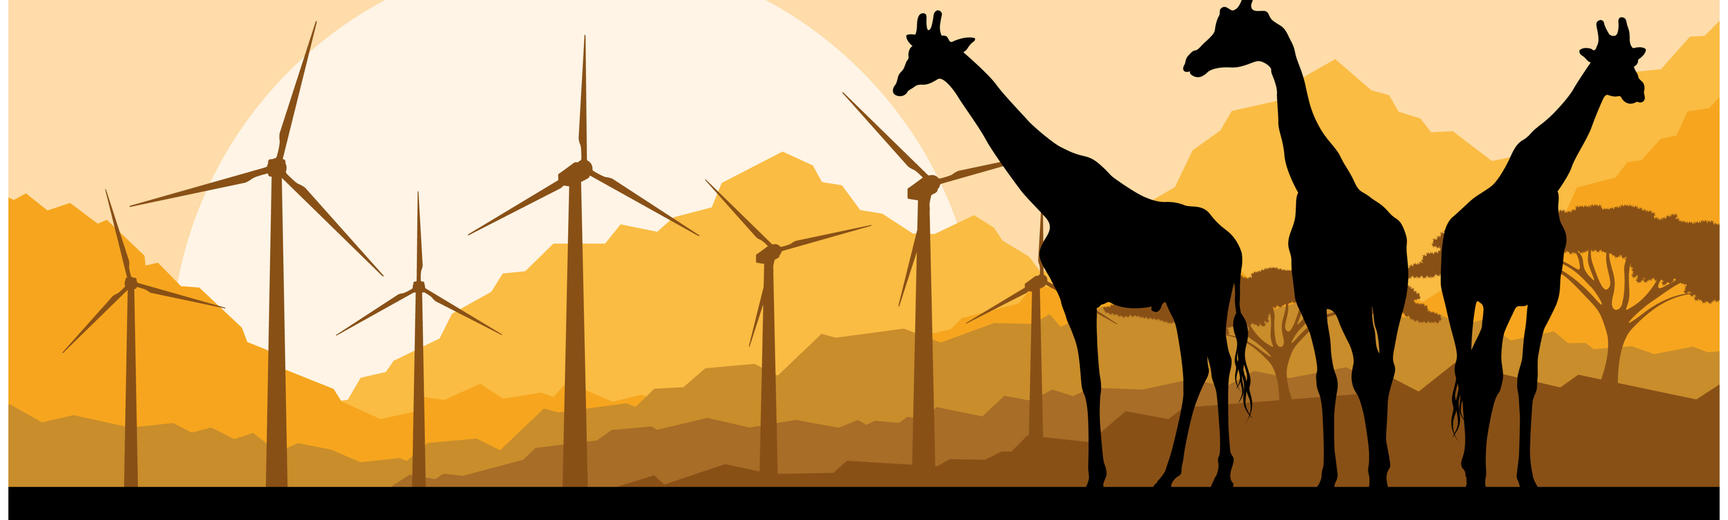 A graphic illustration showing silhouettes of three giraffes against an African landscape of acacia trees, mountains, a bright yellow sun, and a group of wind turbines